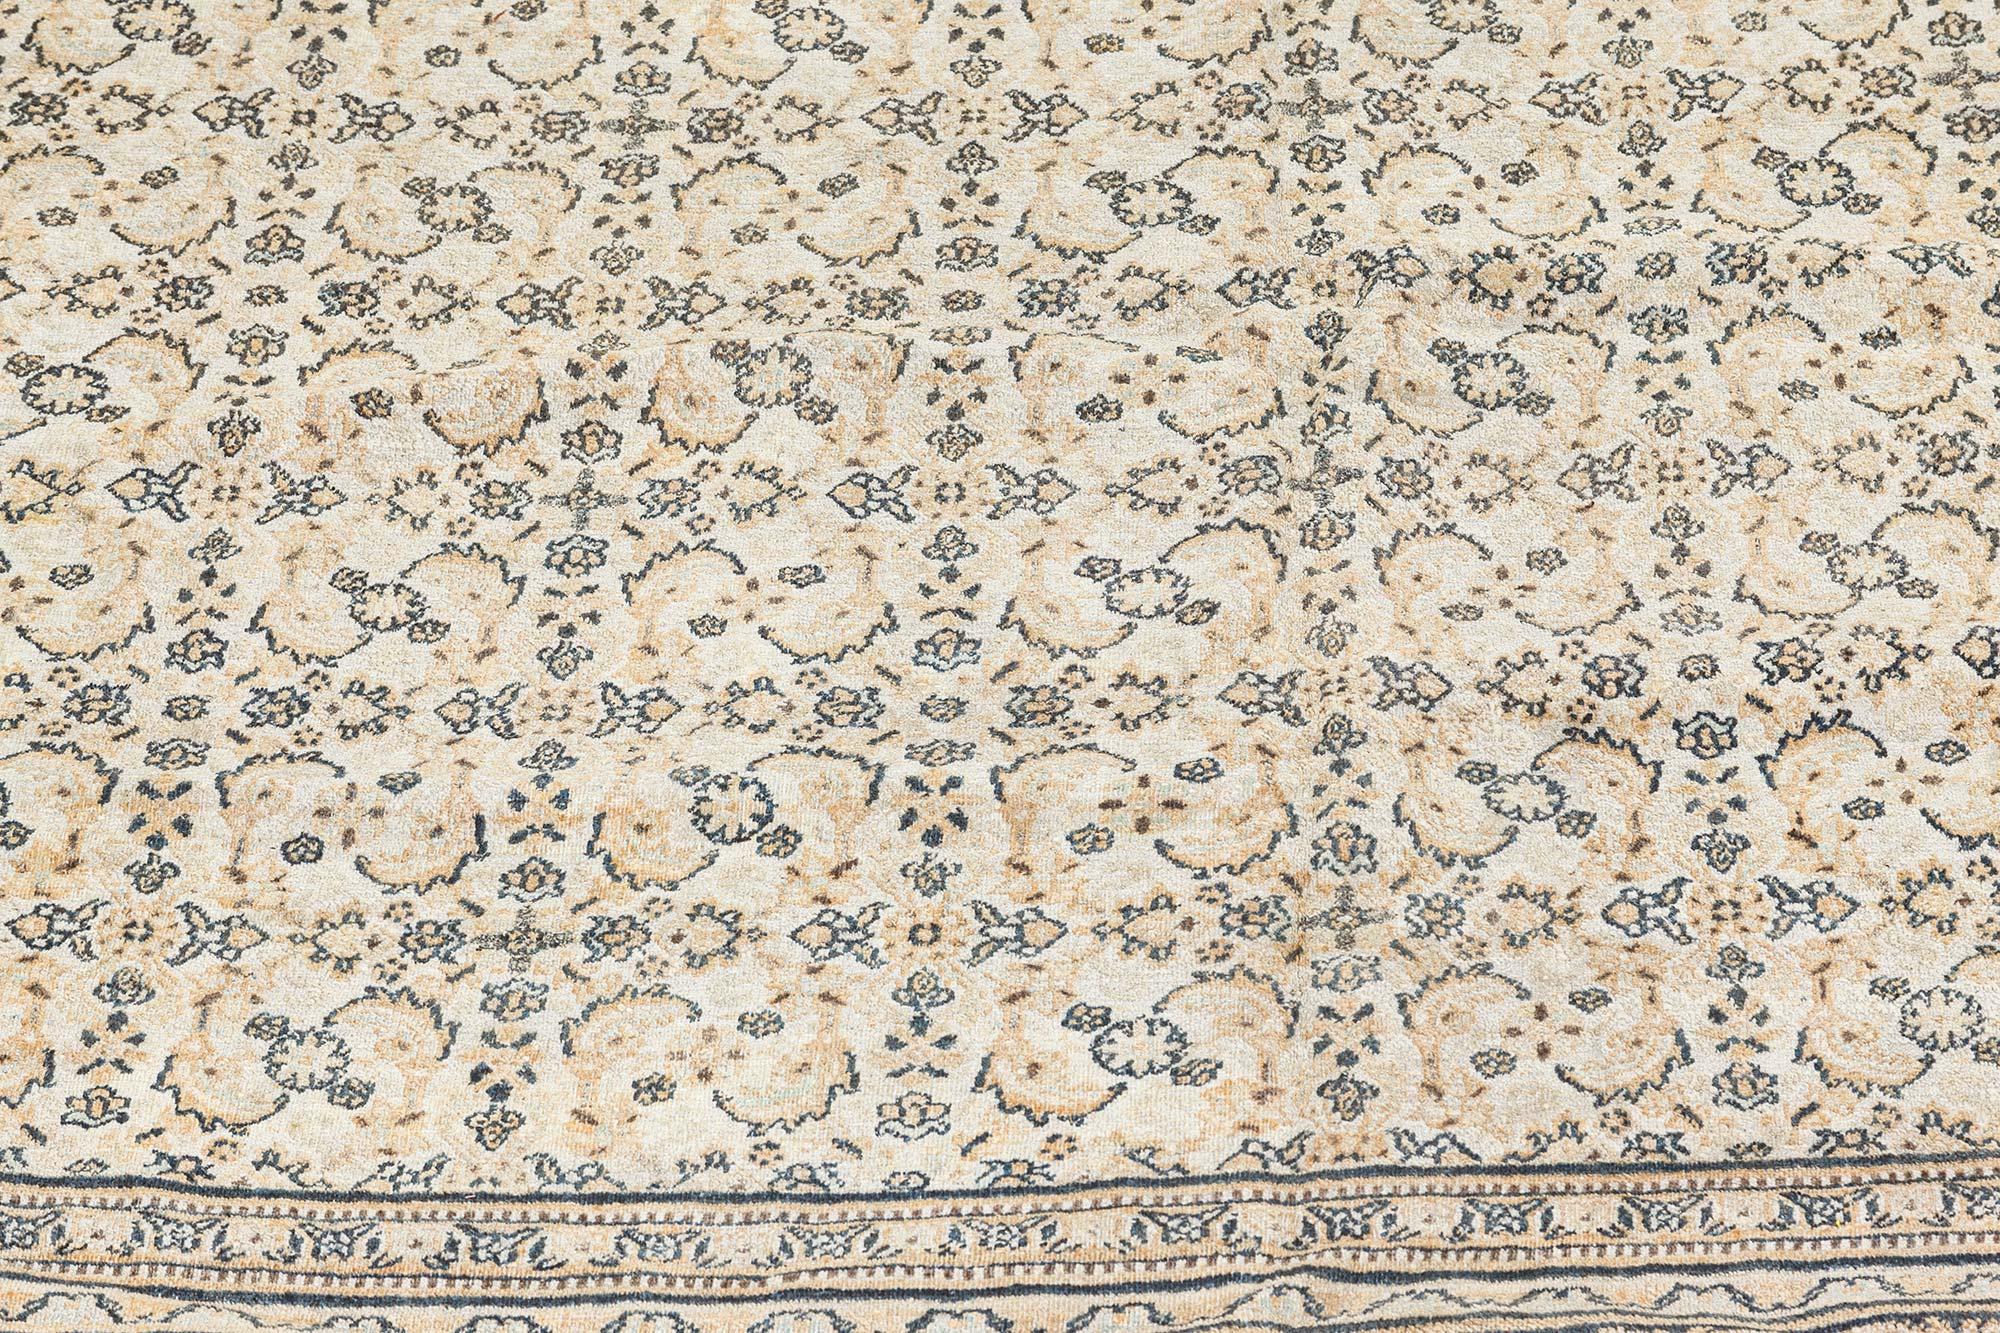 19th Century Persian Meshad Handmade Wool Carpet In Good Condition For Sale In New York, NY